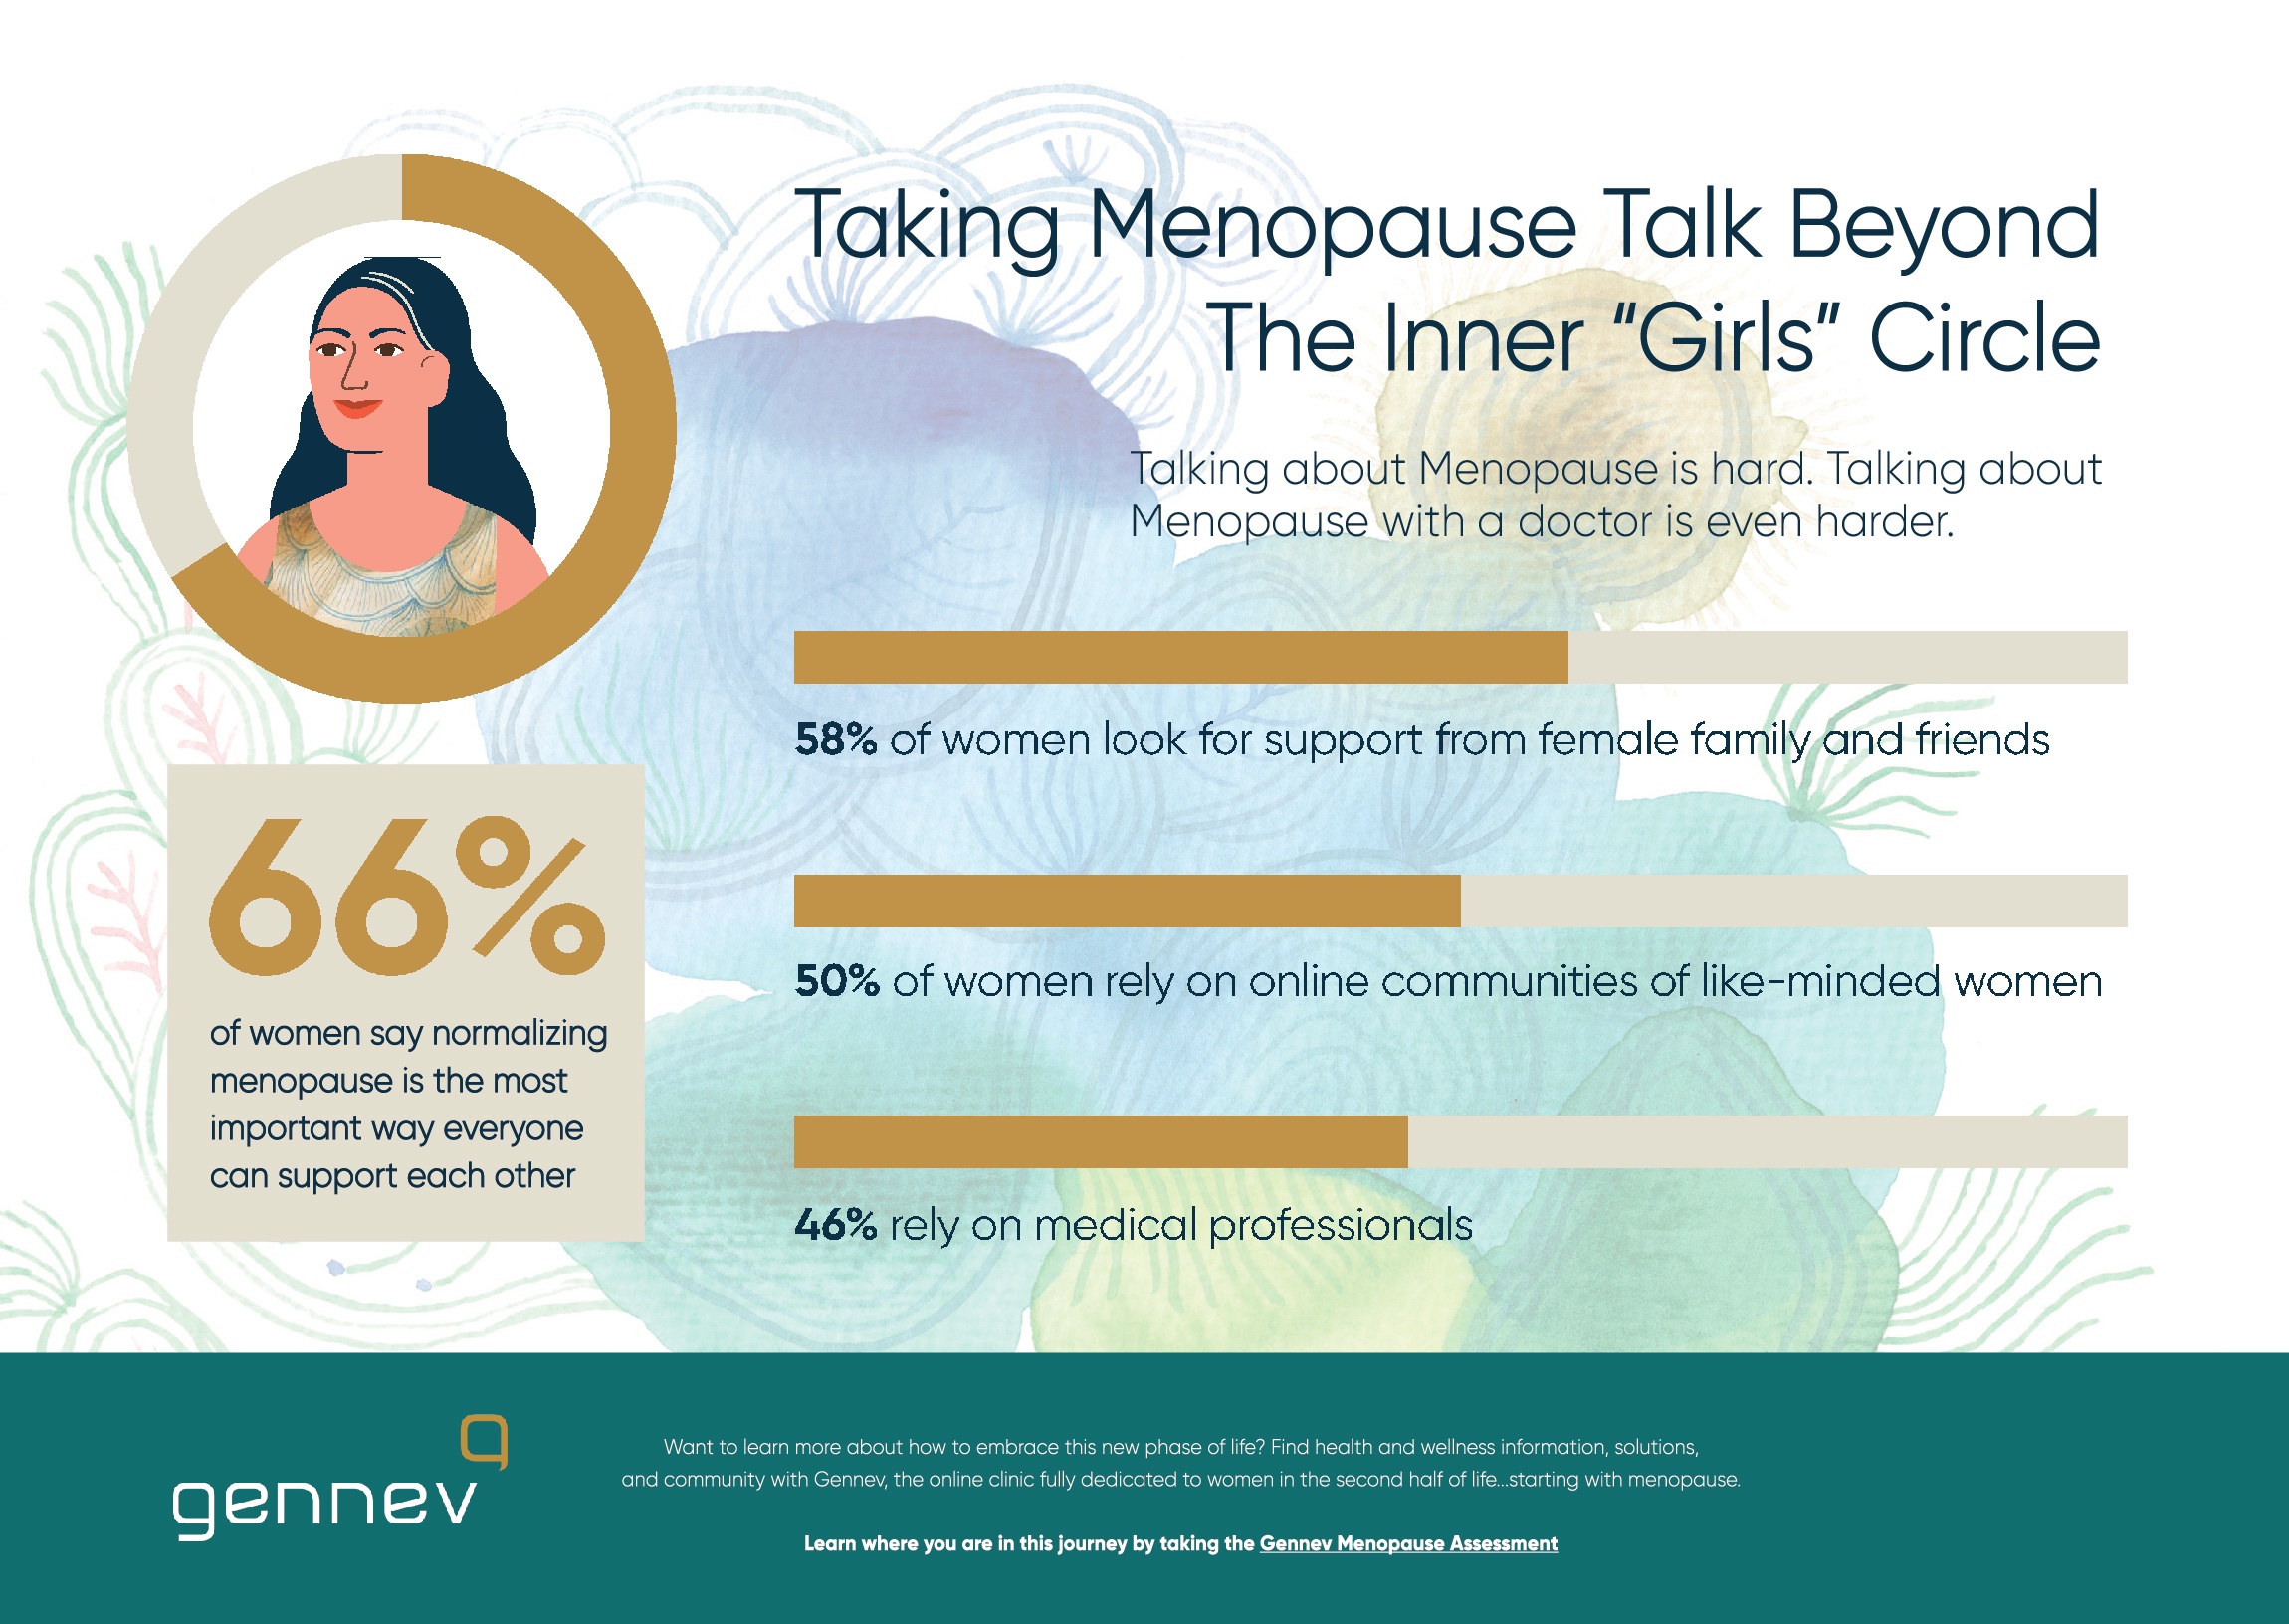 66% of Women Say Normalizing Menopause is Important for Support